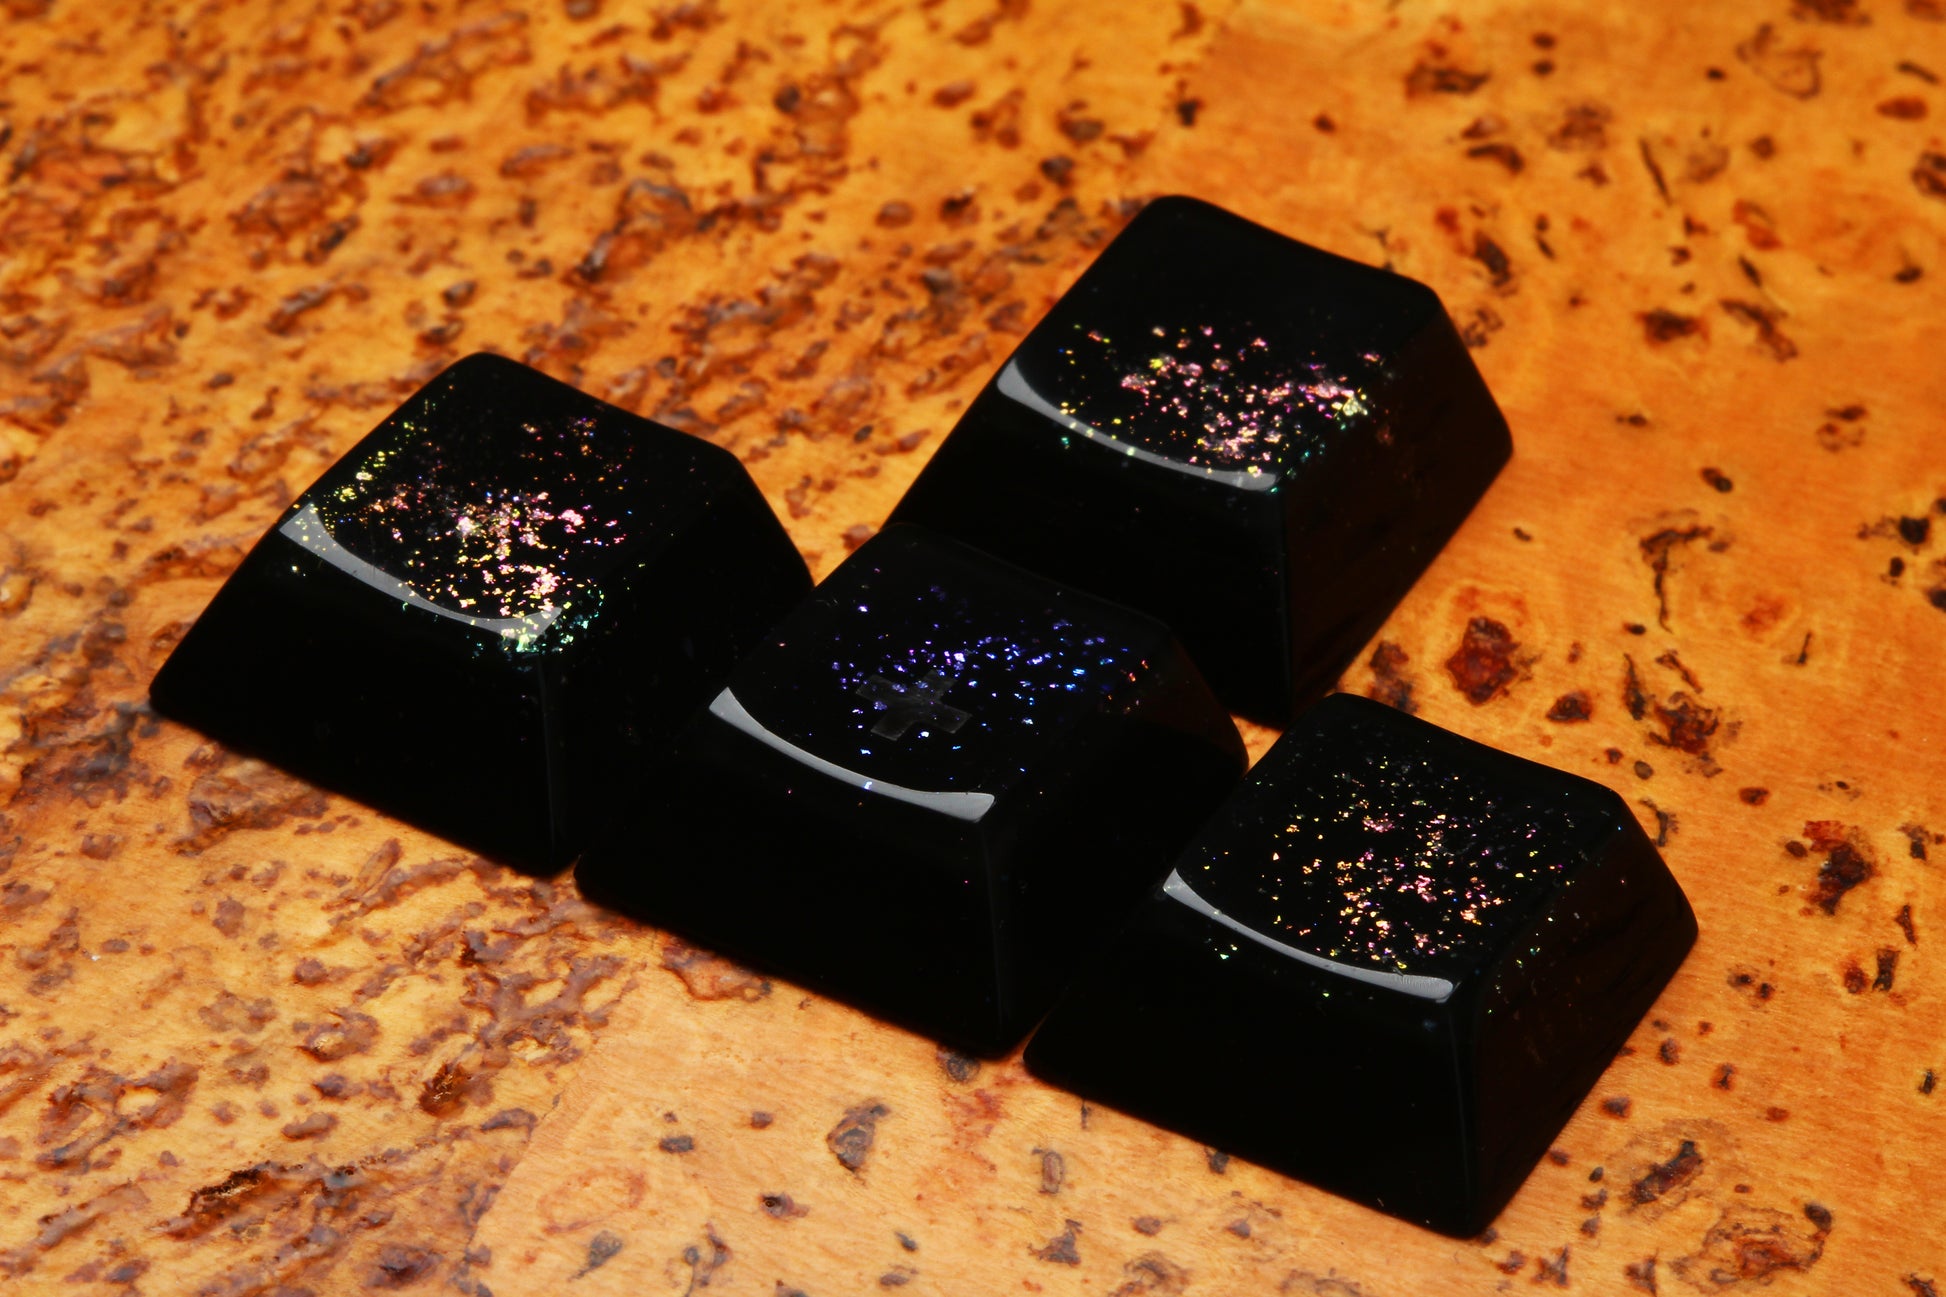 Cherry Profile Deep Field WASD - Hydroverse 2 - PrimeCaps Keycap - Blank and Sculpted Artisan Keycaps for cherry MX mechanical keyboards 